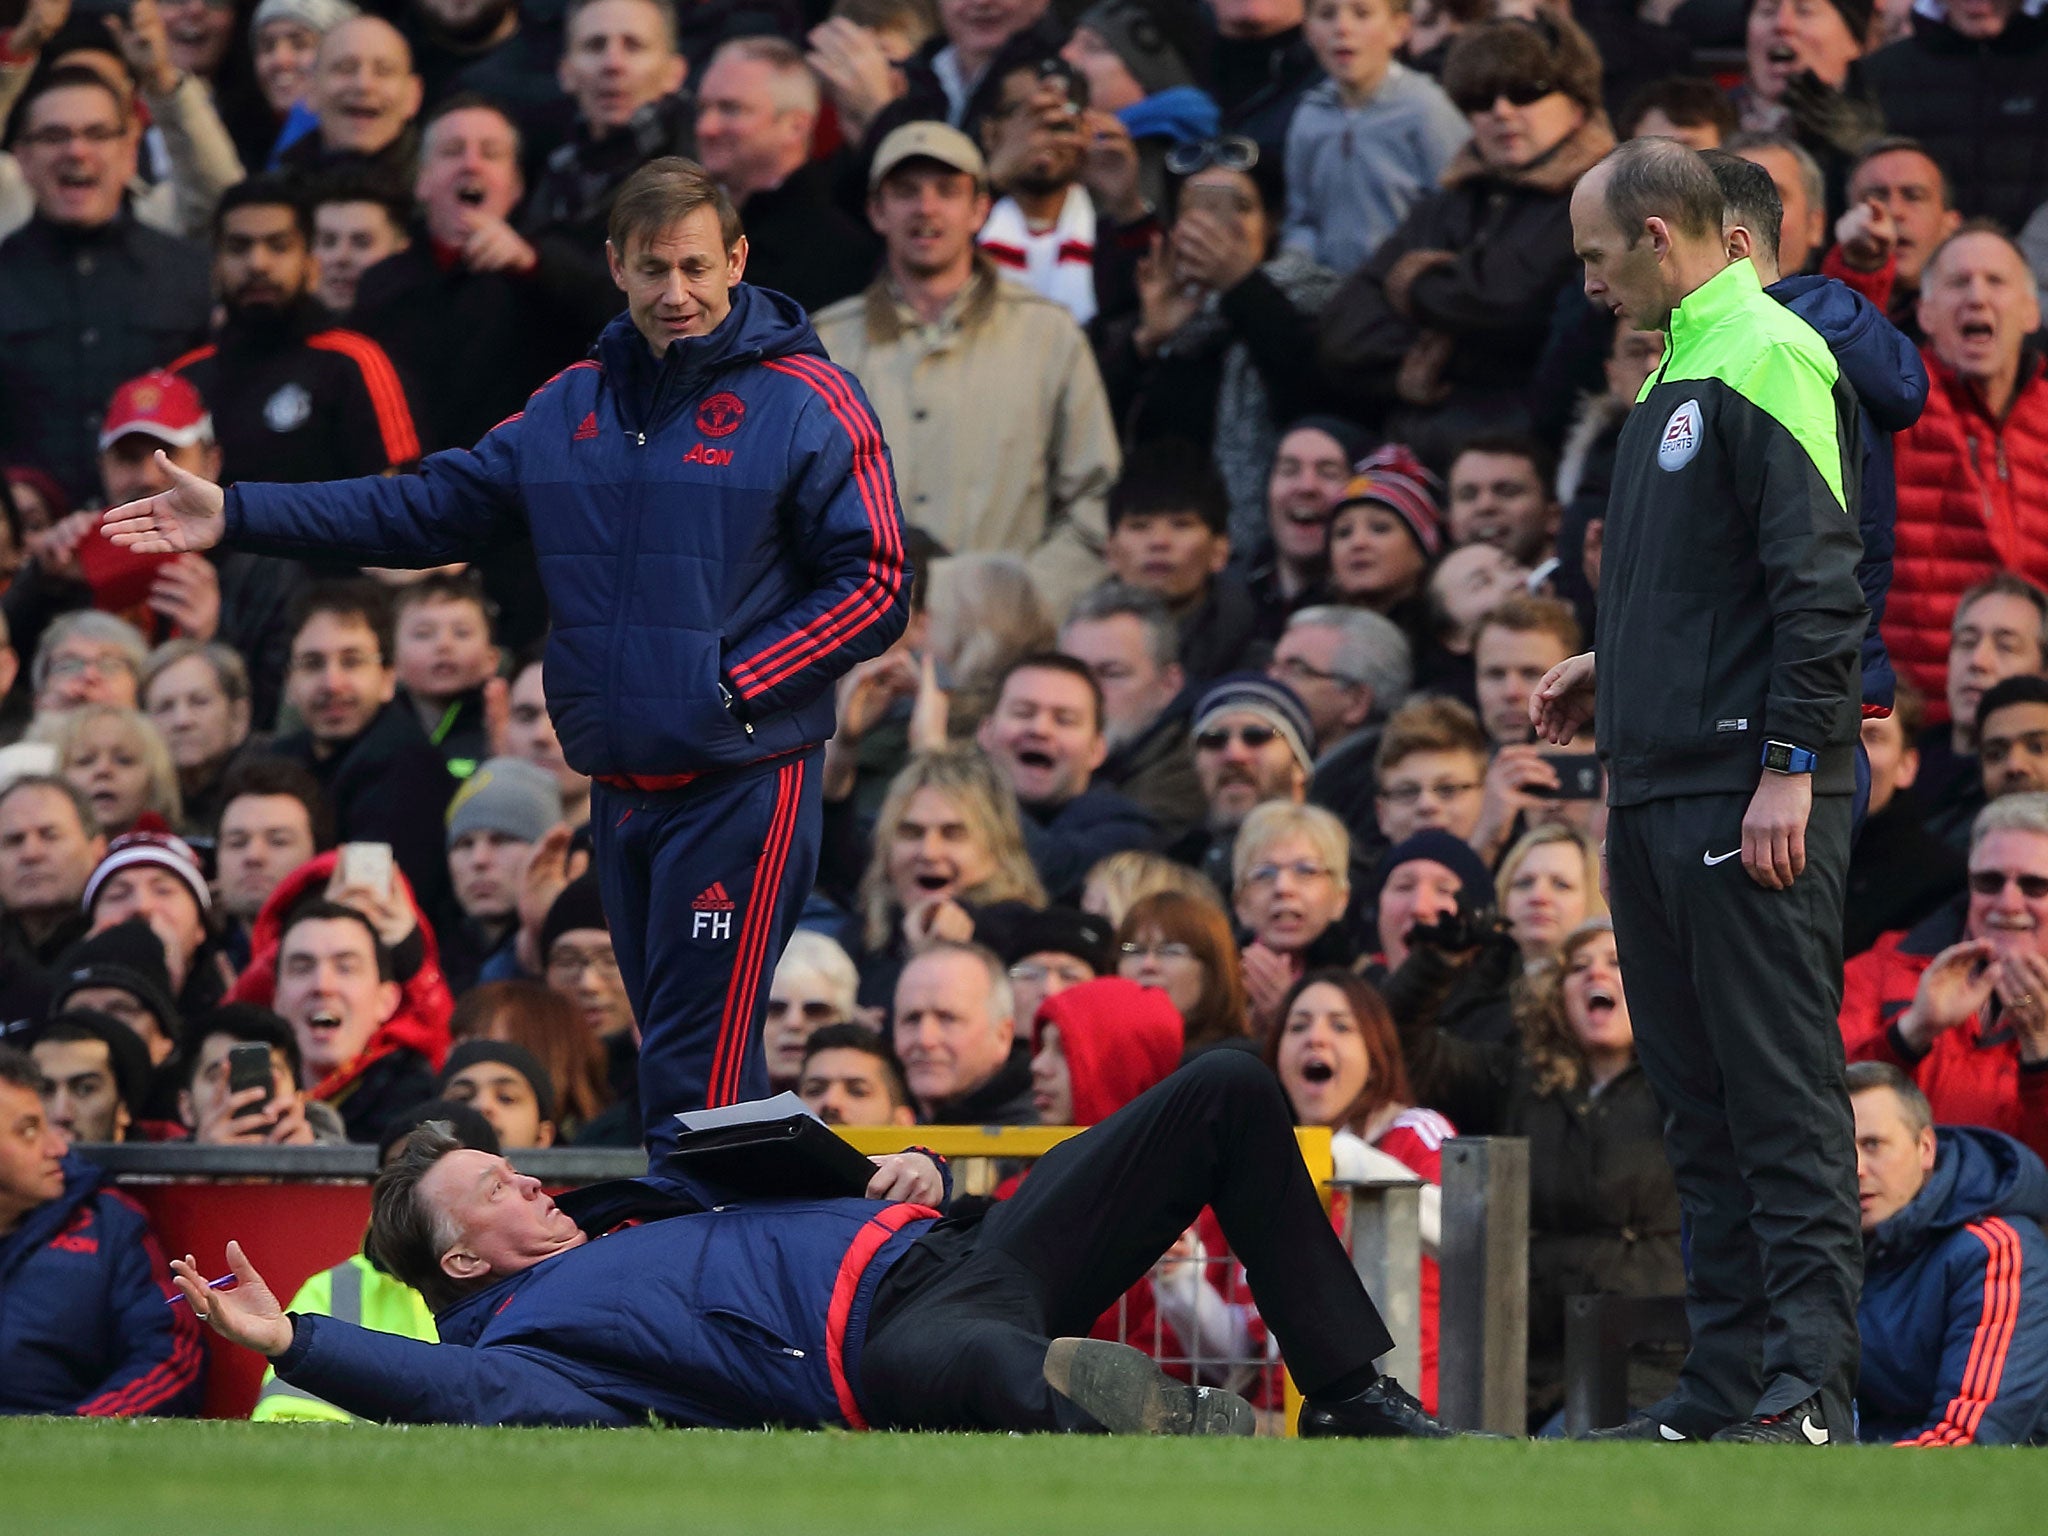 Louis van Gaal took to the floor during his side's win over Arsenal in February (Getty)